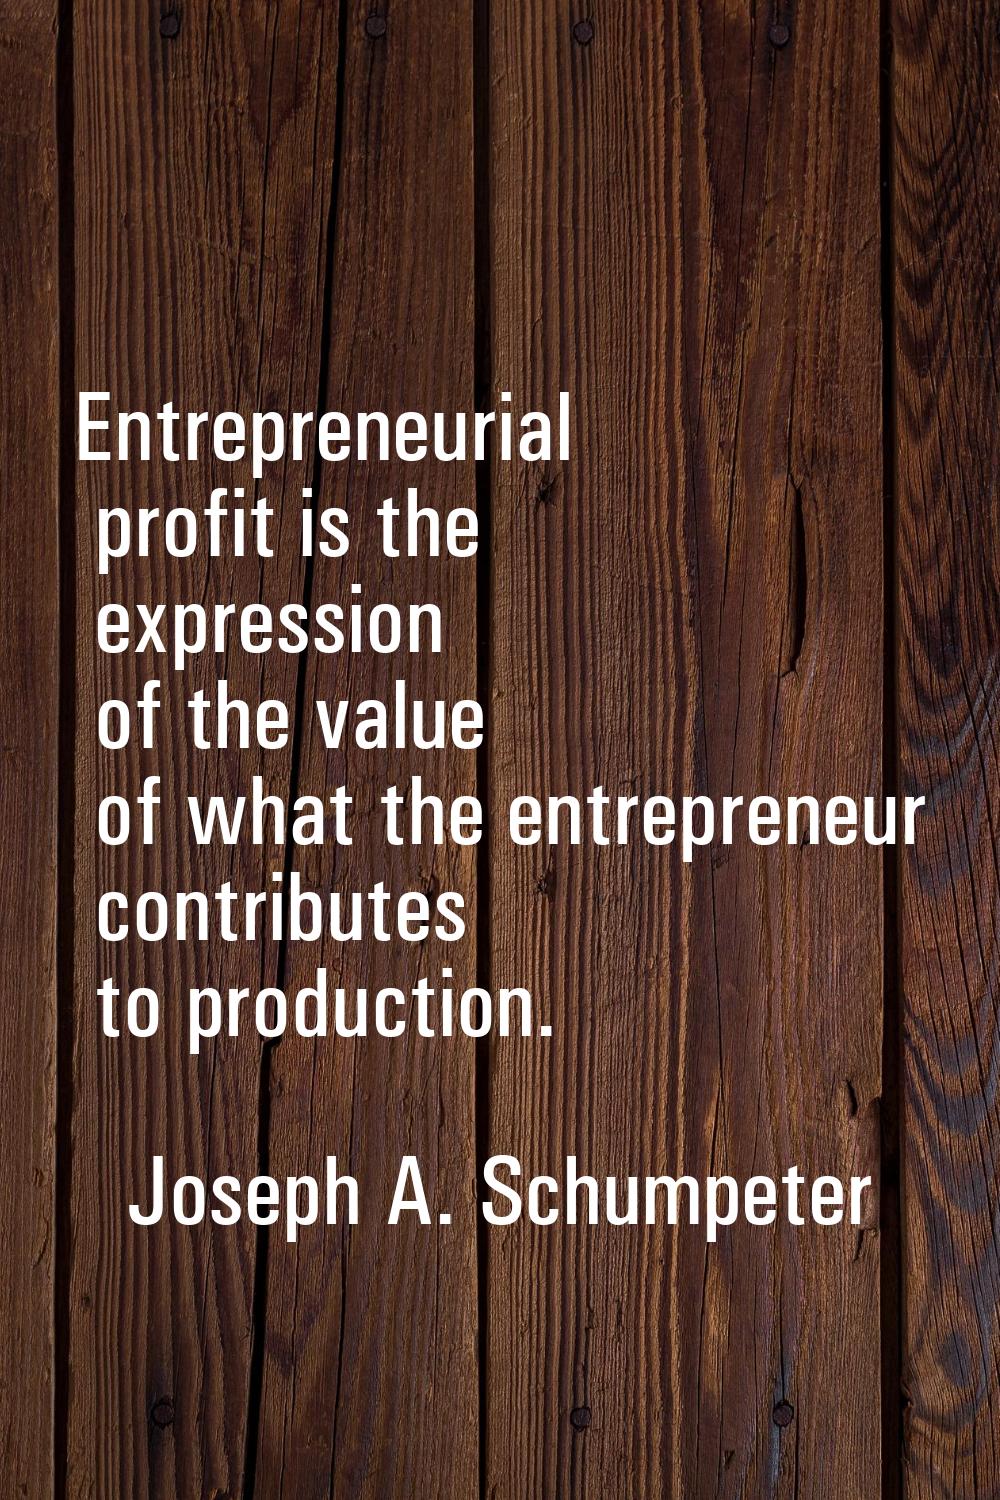 Entrepreneurial profit is the expression of the value of what the entrepreneur contributes to produ